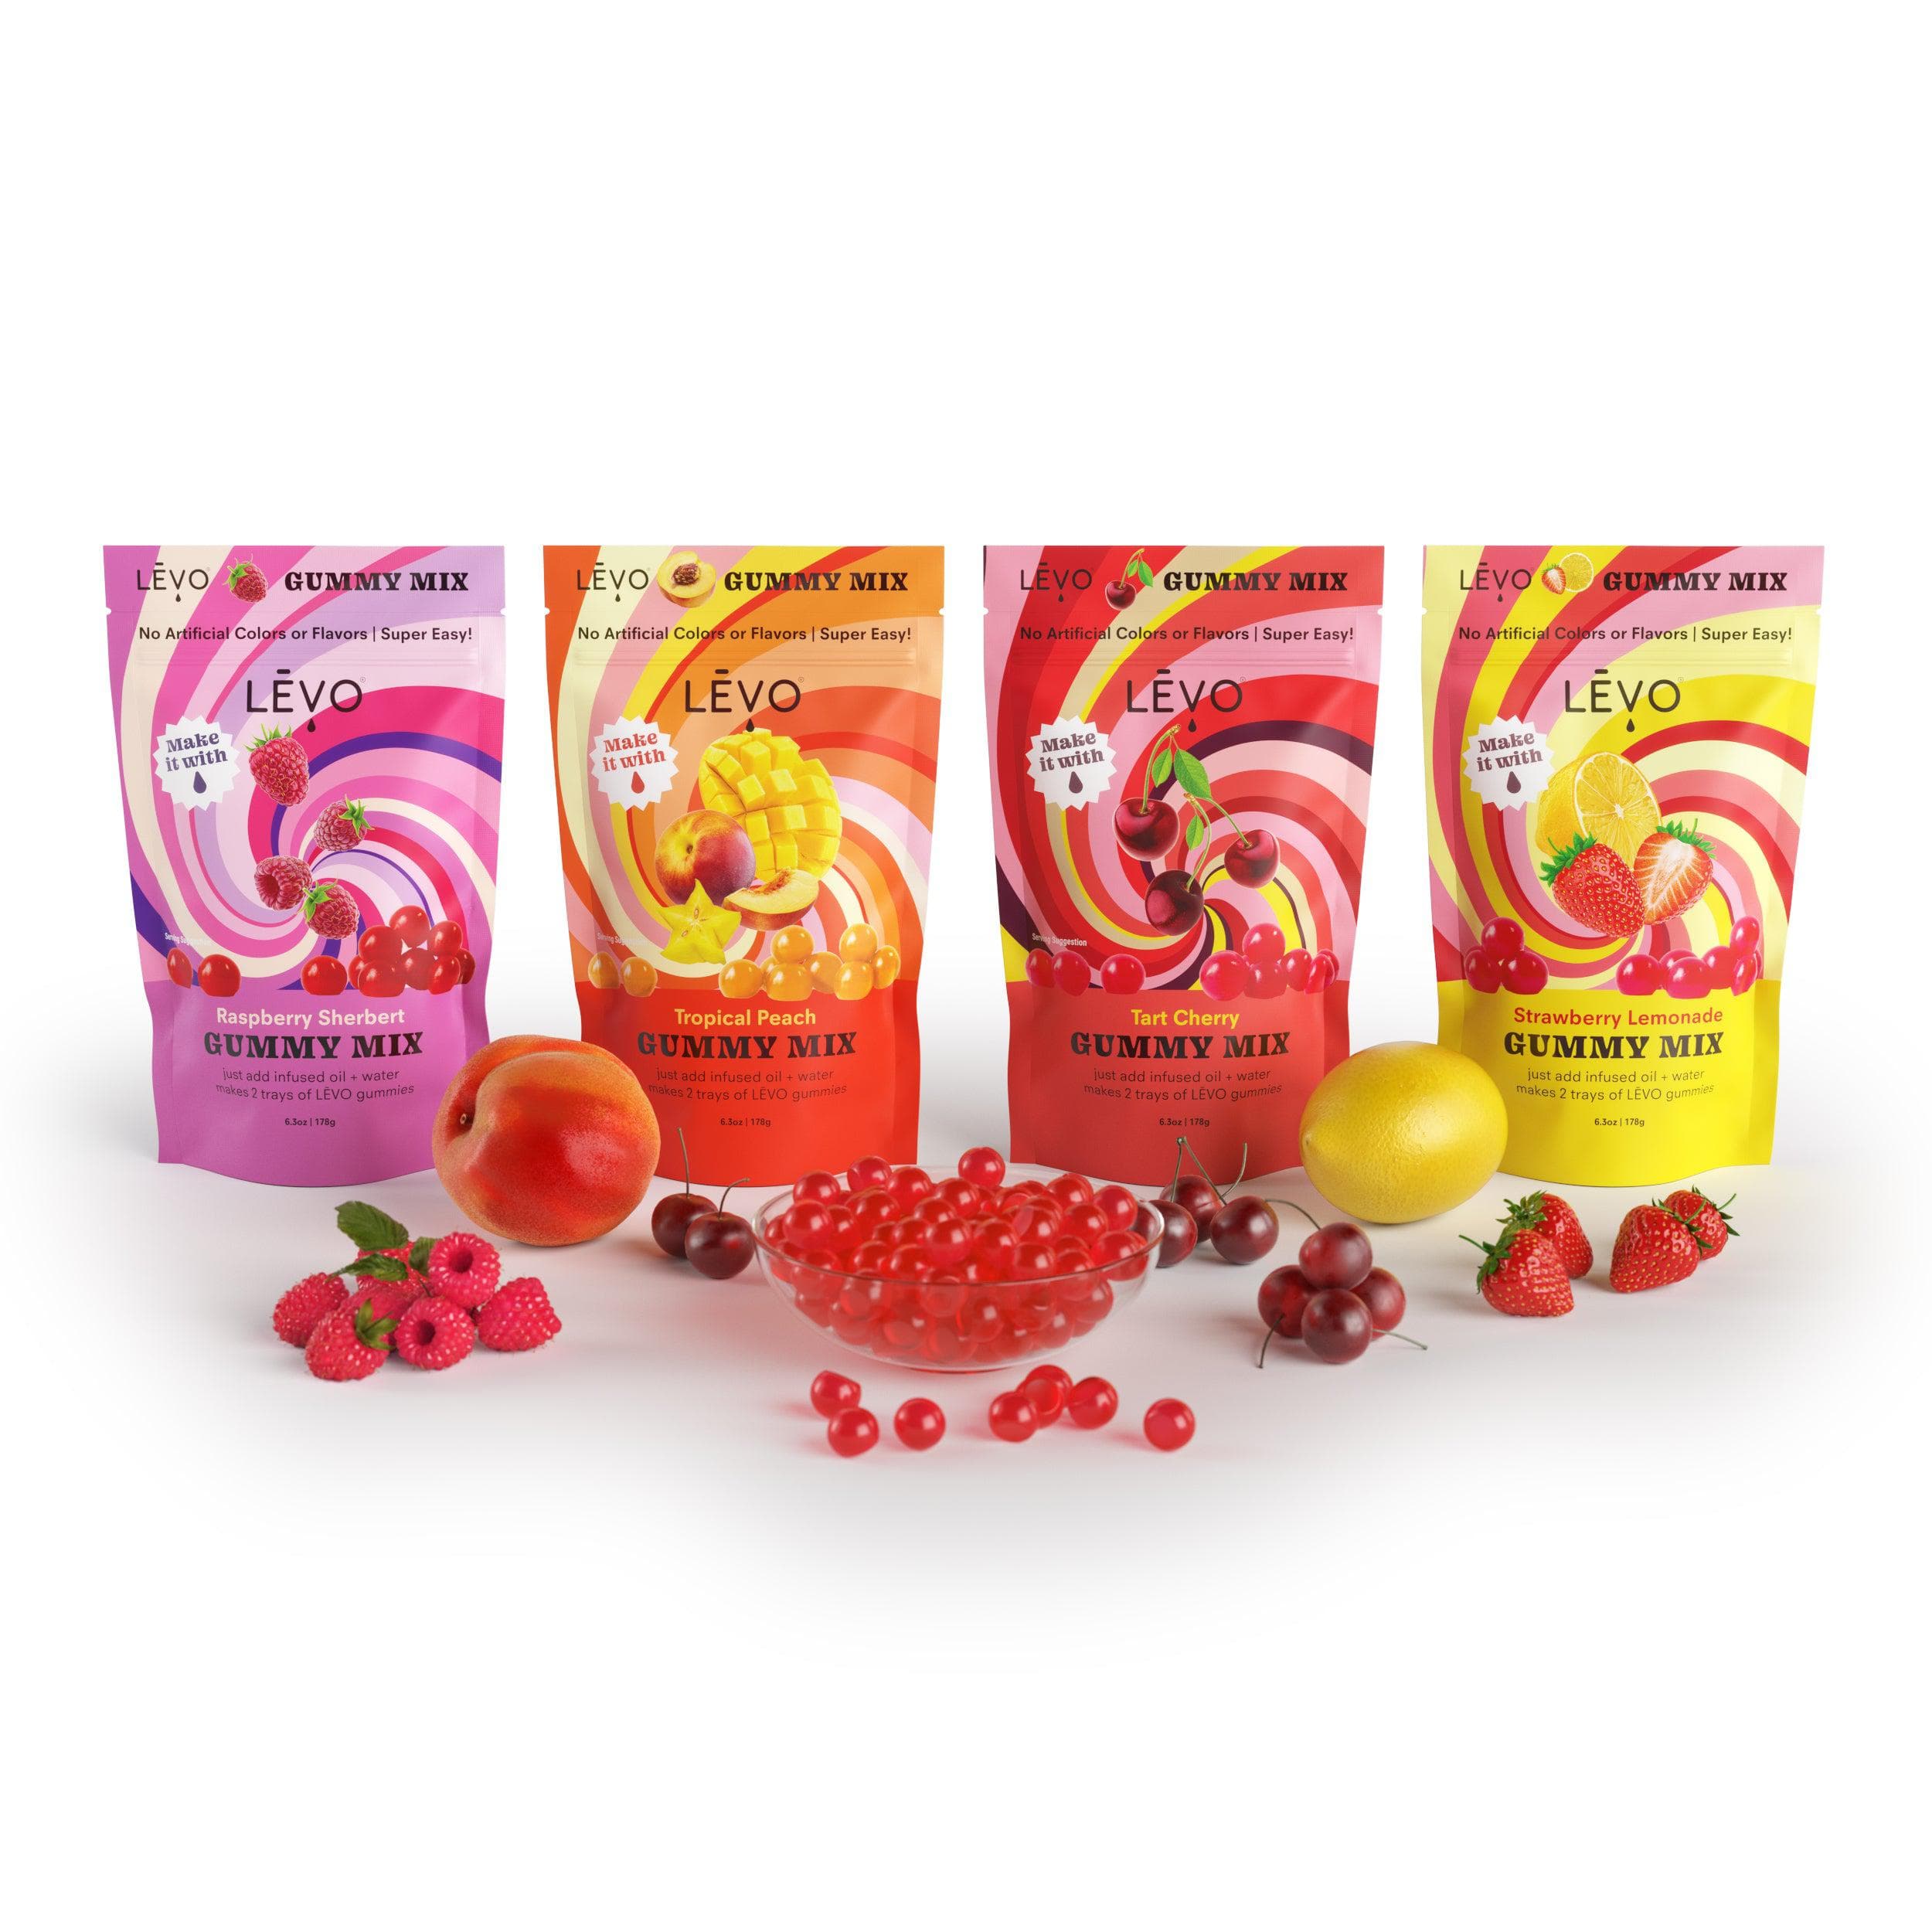 Buy more, save more! Subscribe to LEVO gummy mix four pack for monthly shipments and save 10%.